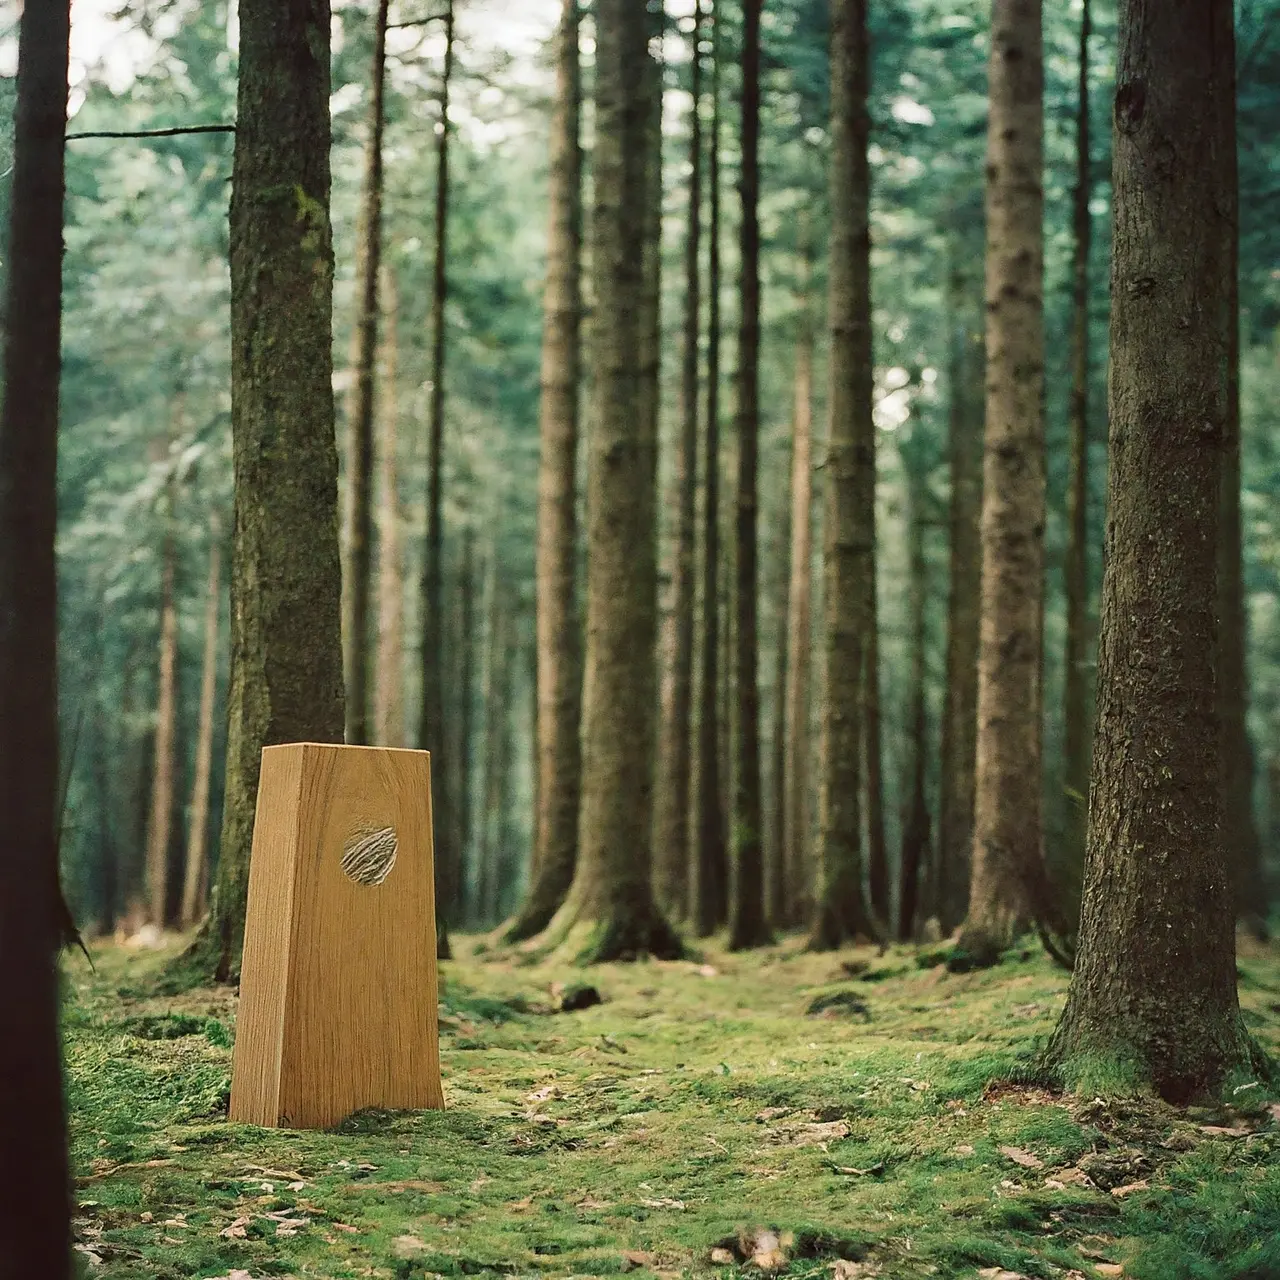 A tranquil forest clearing with a simple eco-friendly memorial marker. 35mm stock photo